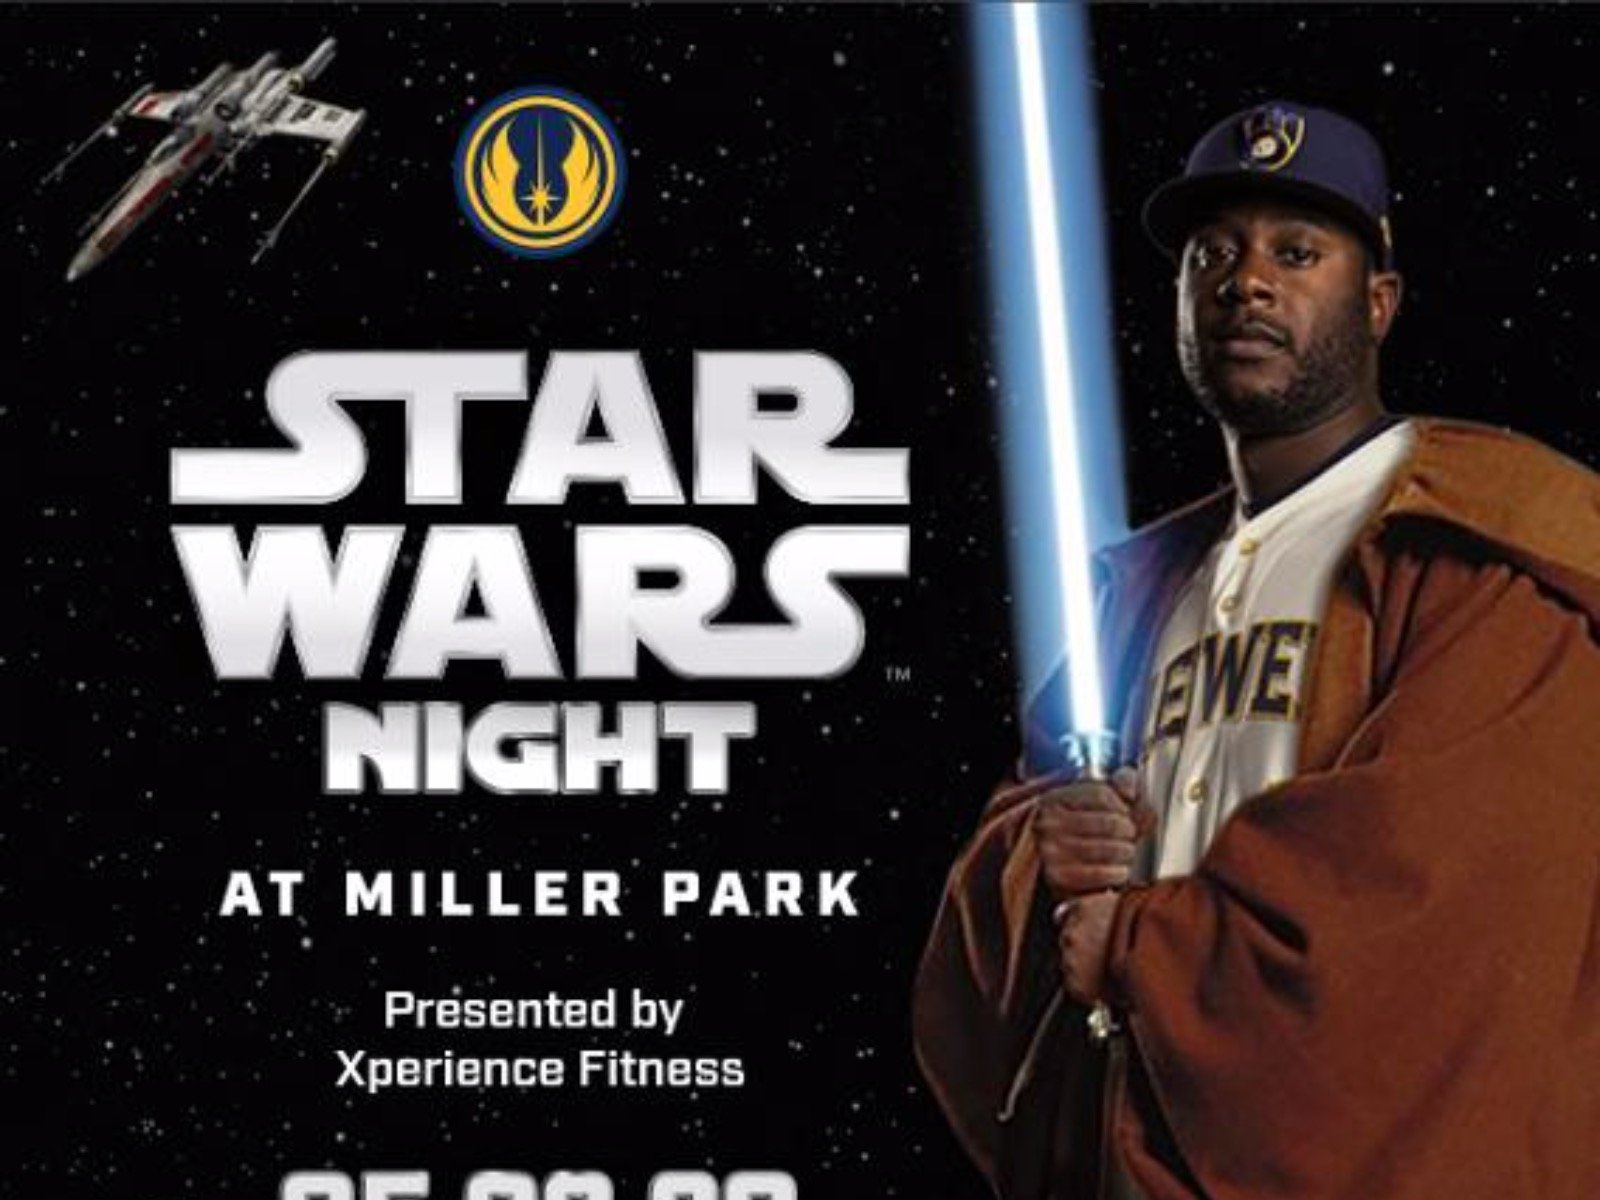 Star Wars Night returns to Miller Park for Brewers 2020 season